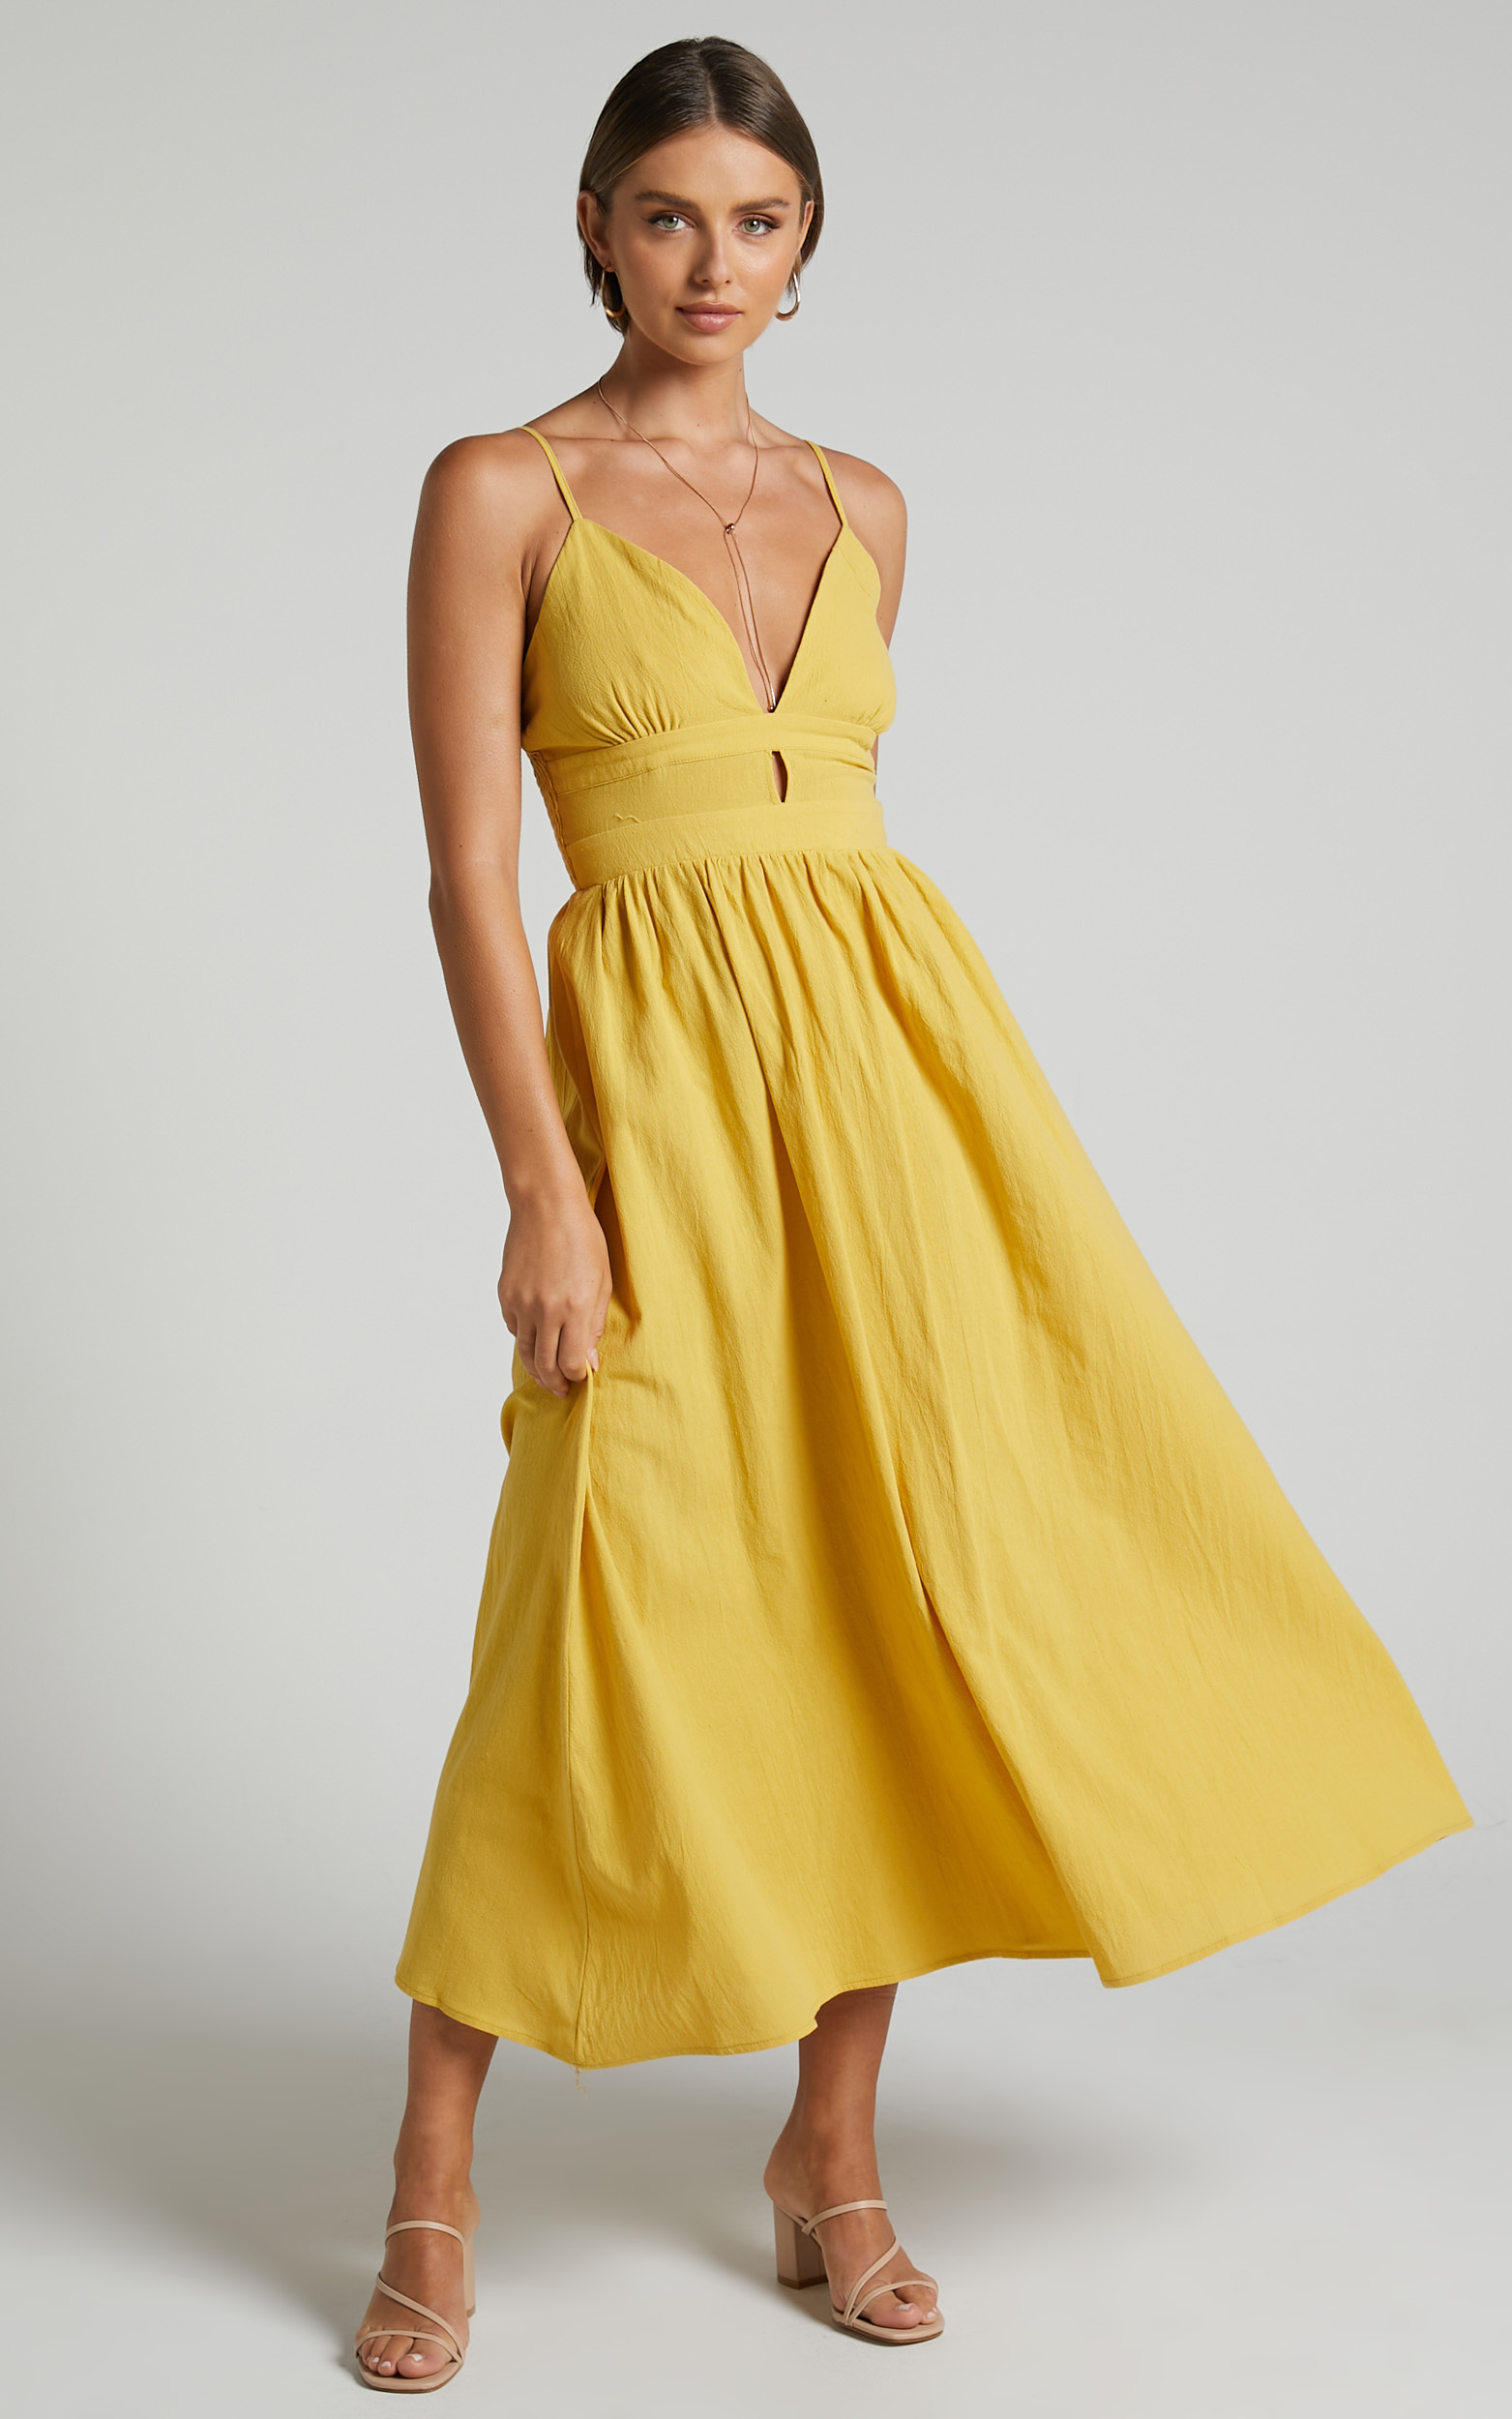 Roskana Midi Dress - Plunge Fit and Flare Dress in Mustard - 06, YEL1, hi-res image number null